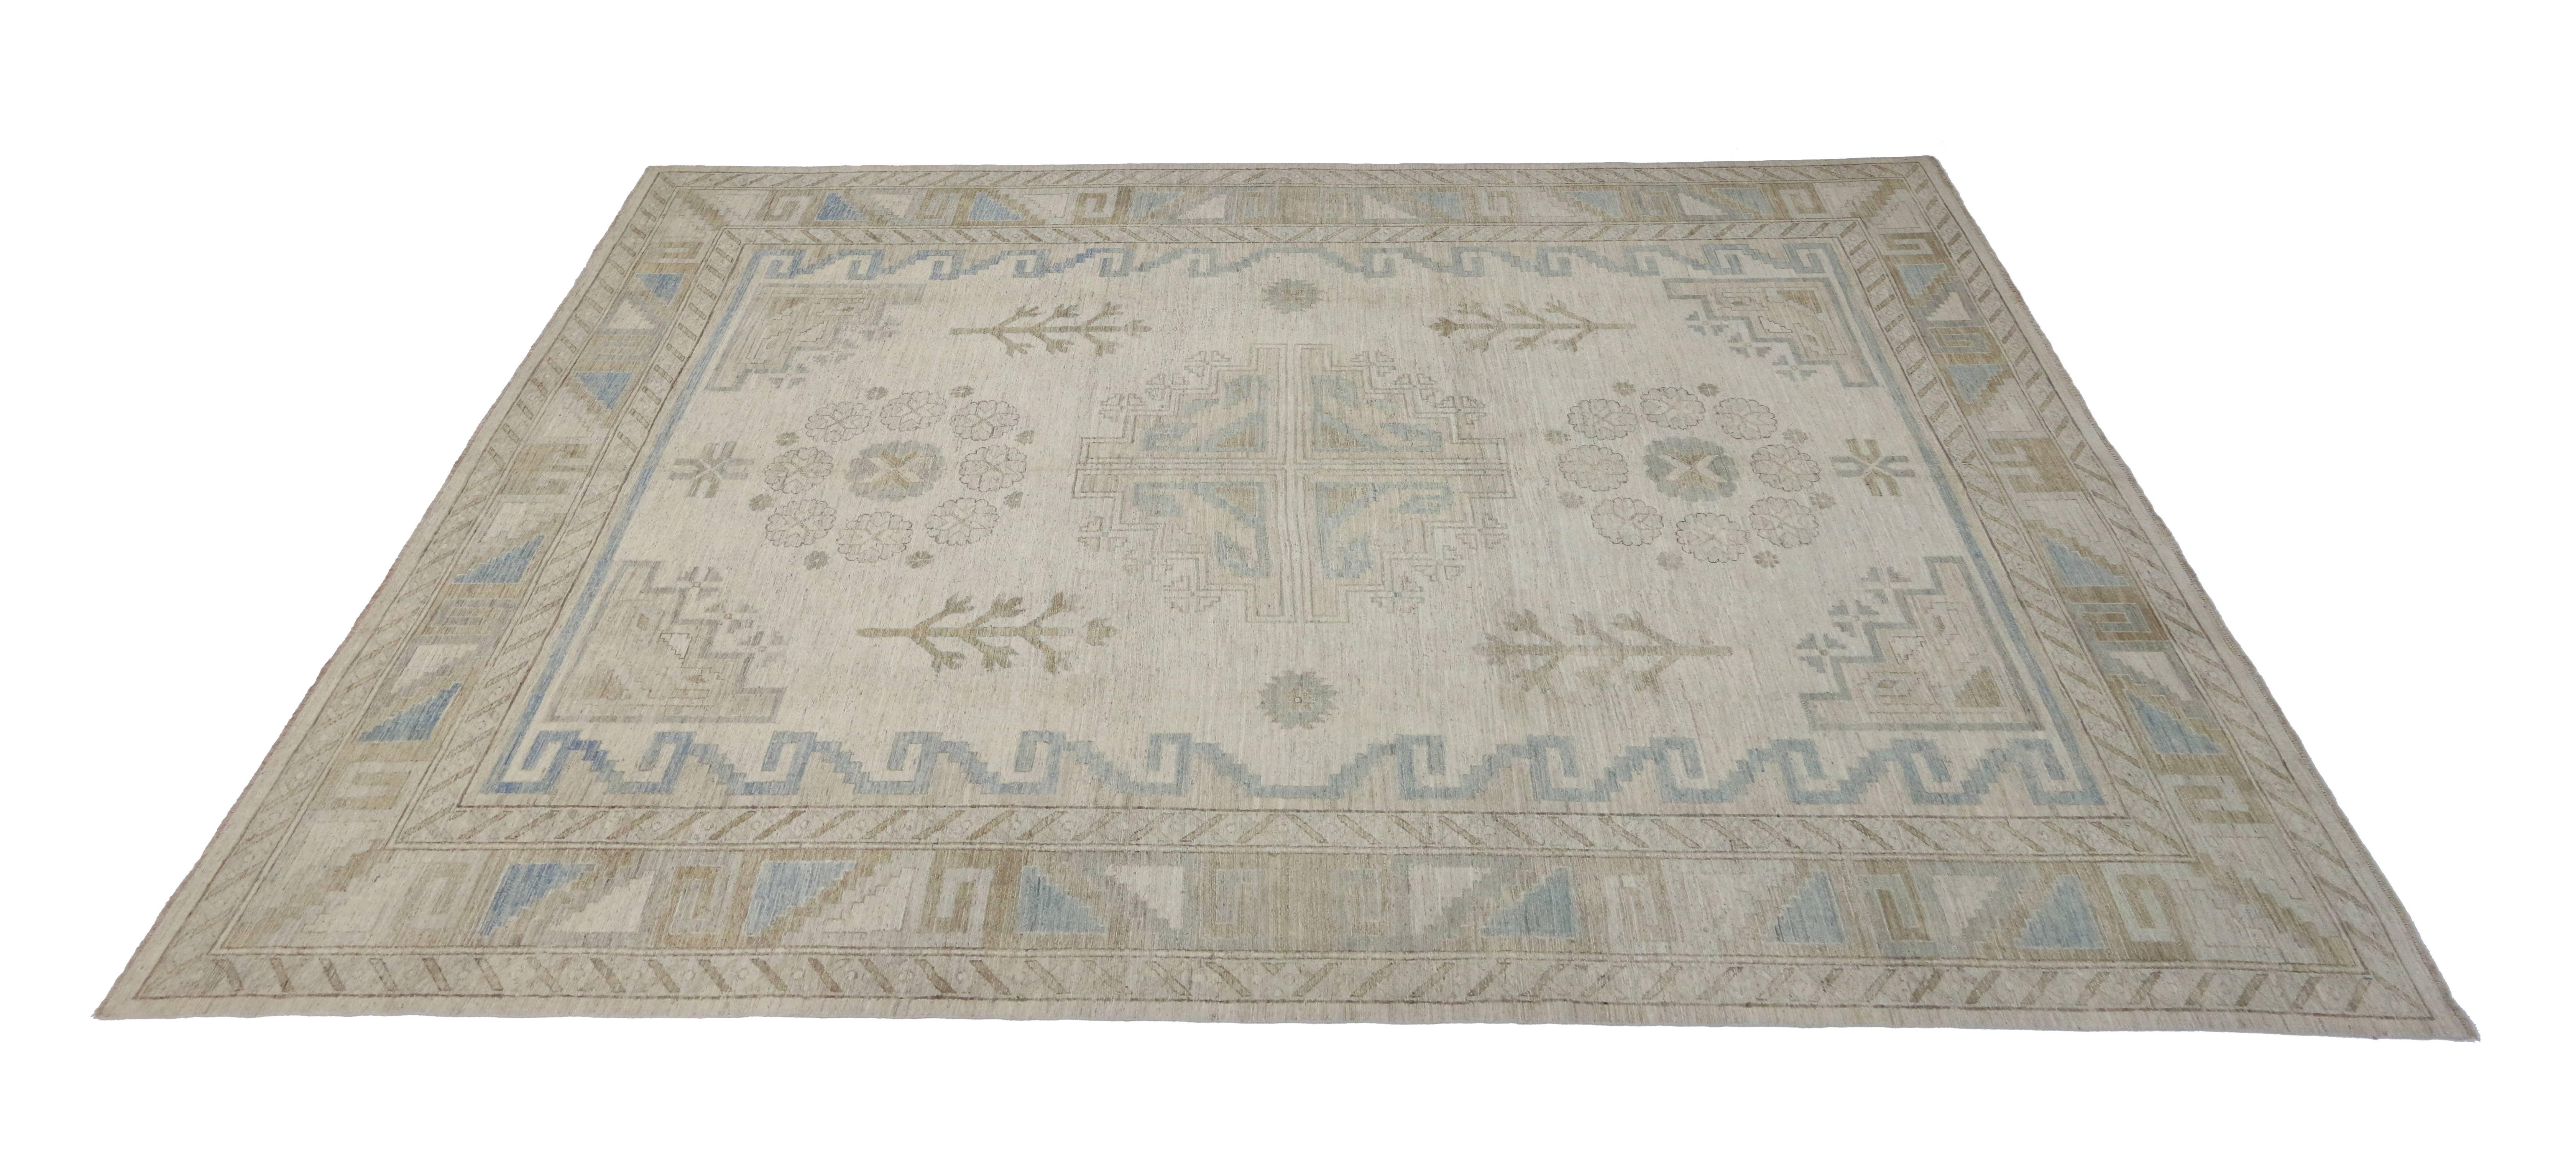 New Transitional Area Rug with Khotan Design in Warm, Neutral Colors 3